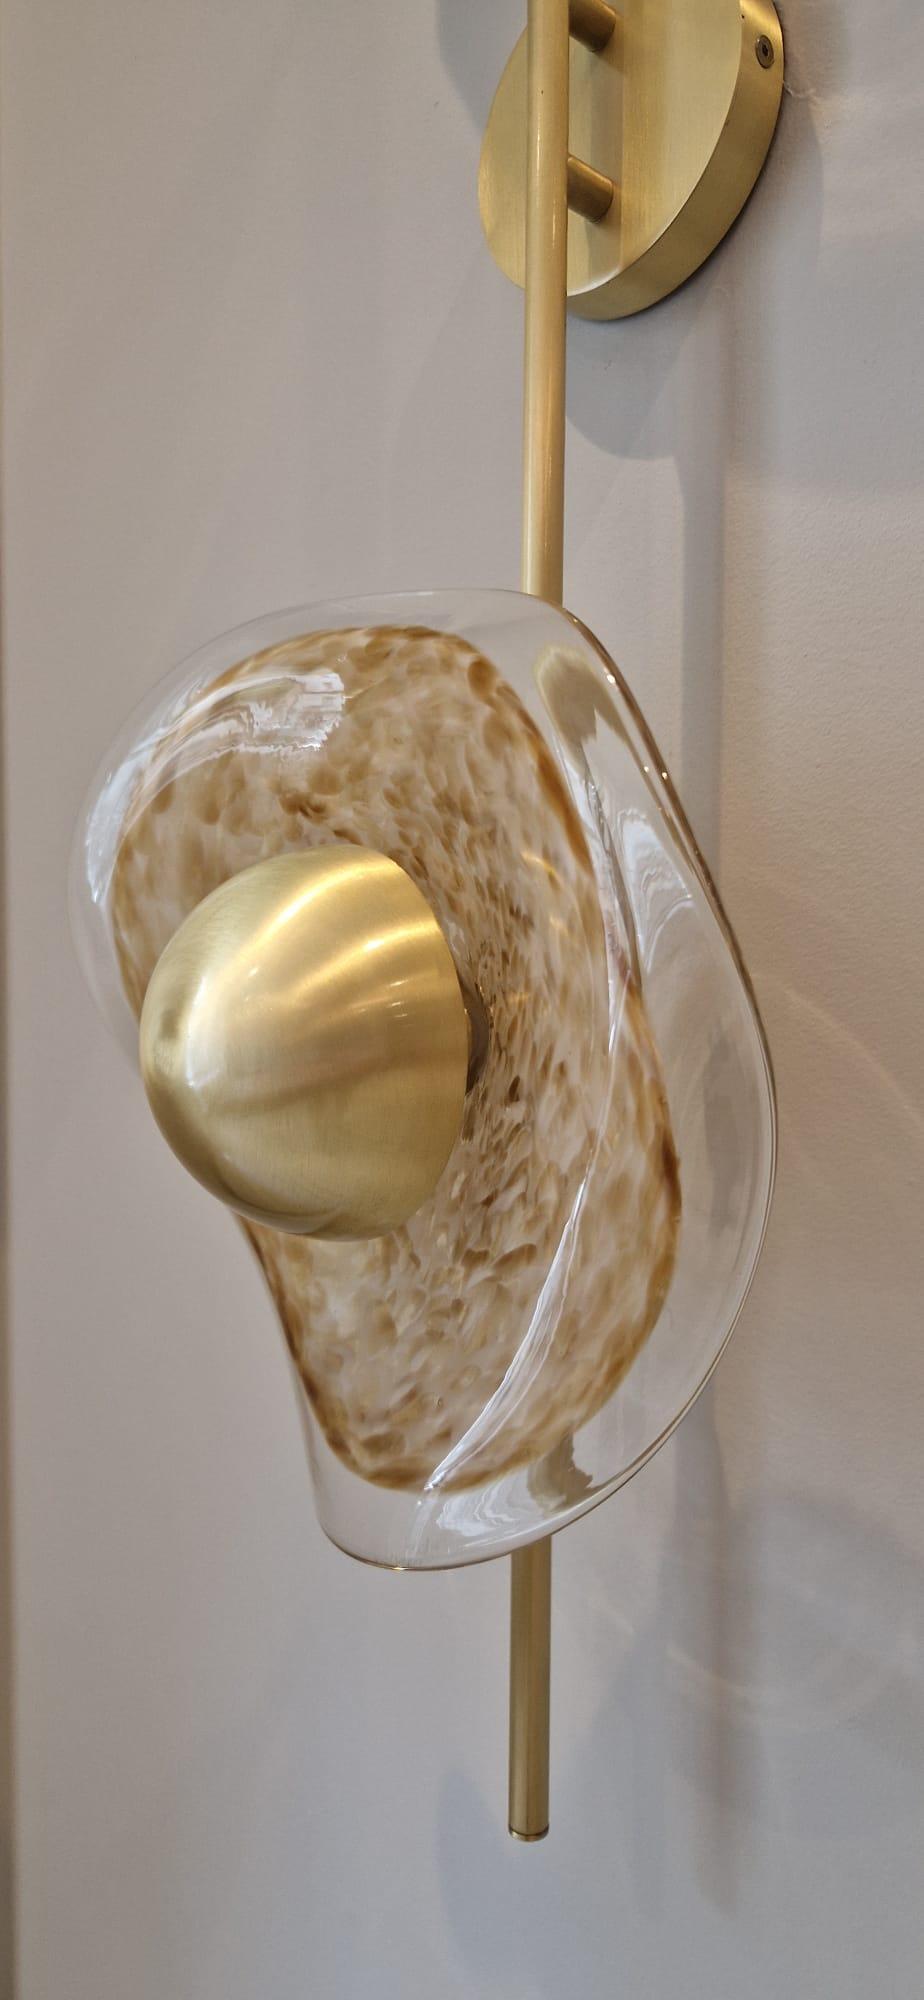 European Imagin Ortus Wall Light in Brushed Brass and Decorative Glass For Sale